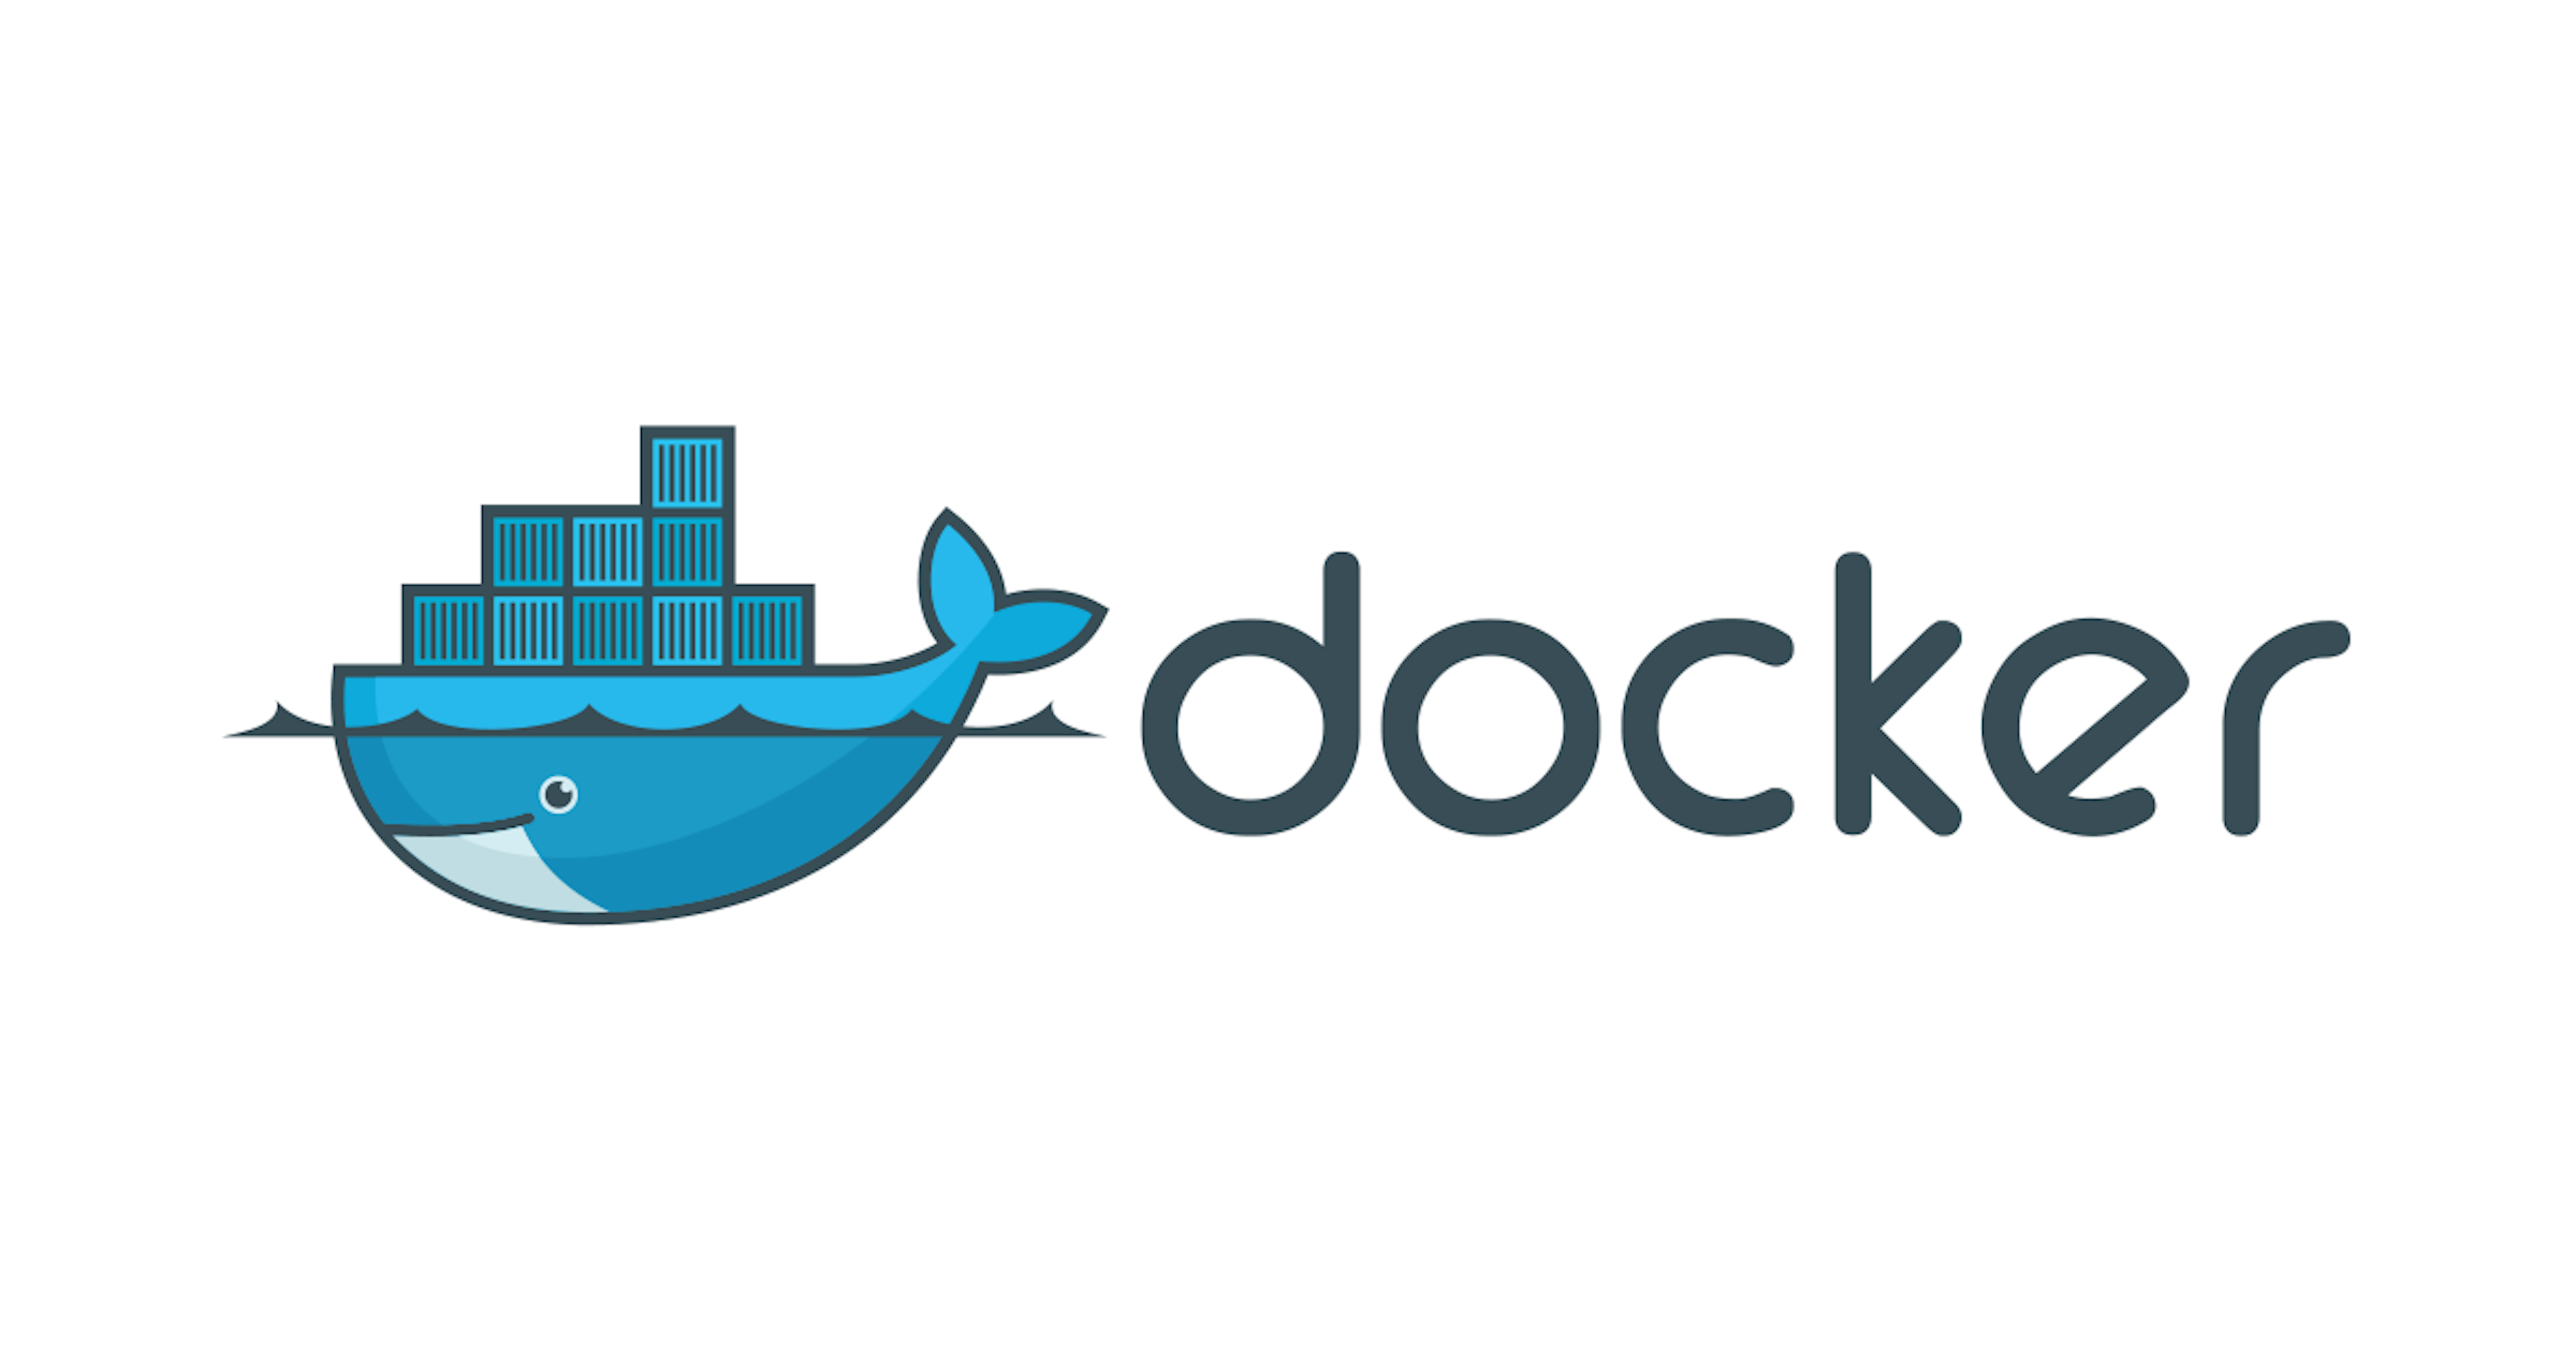 /assets/blog/2015-08-06-building-a-docker-image-with-templating-and-initialization-support/docker-6218a022a0.png